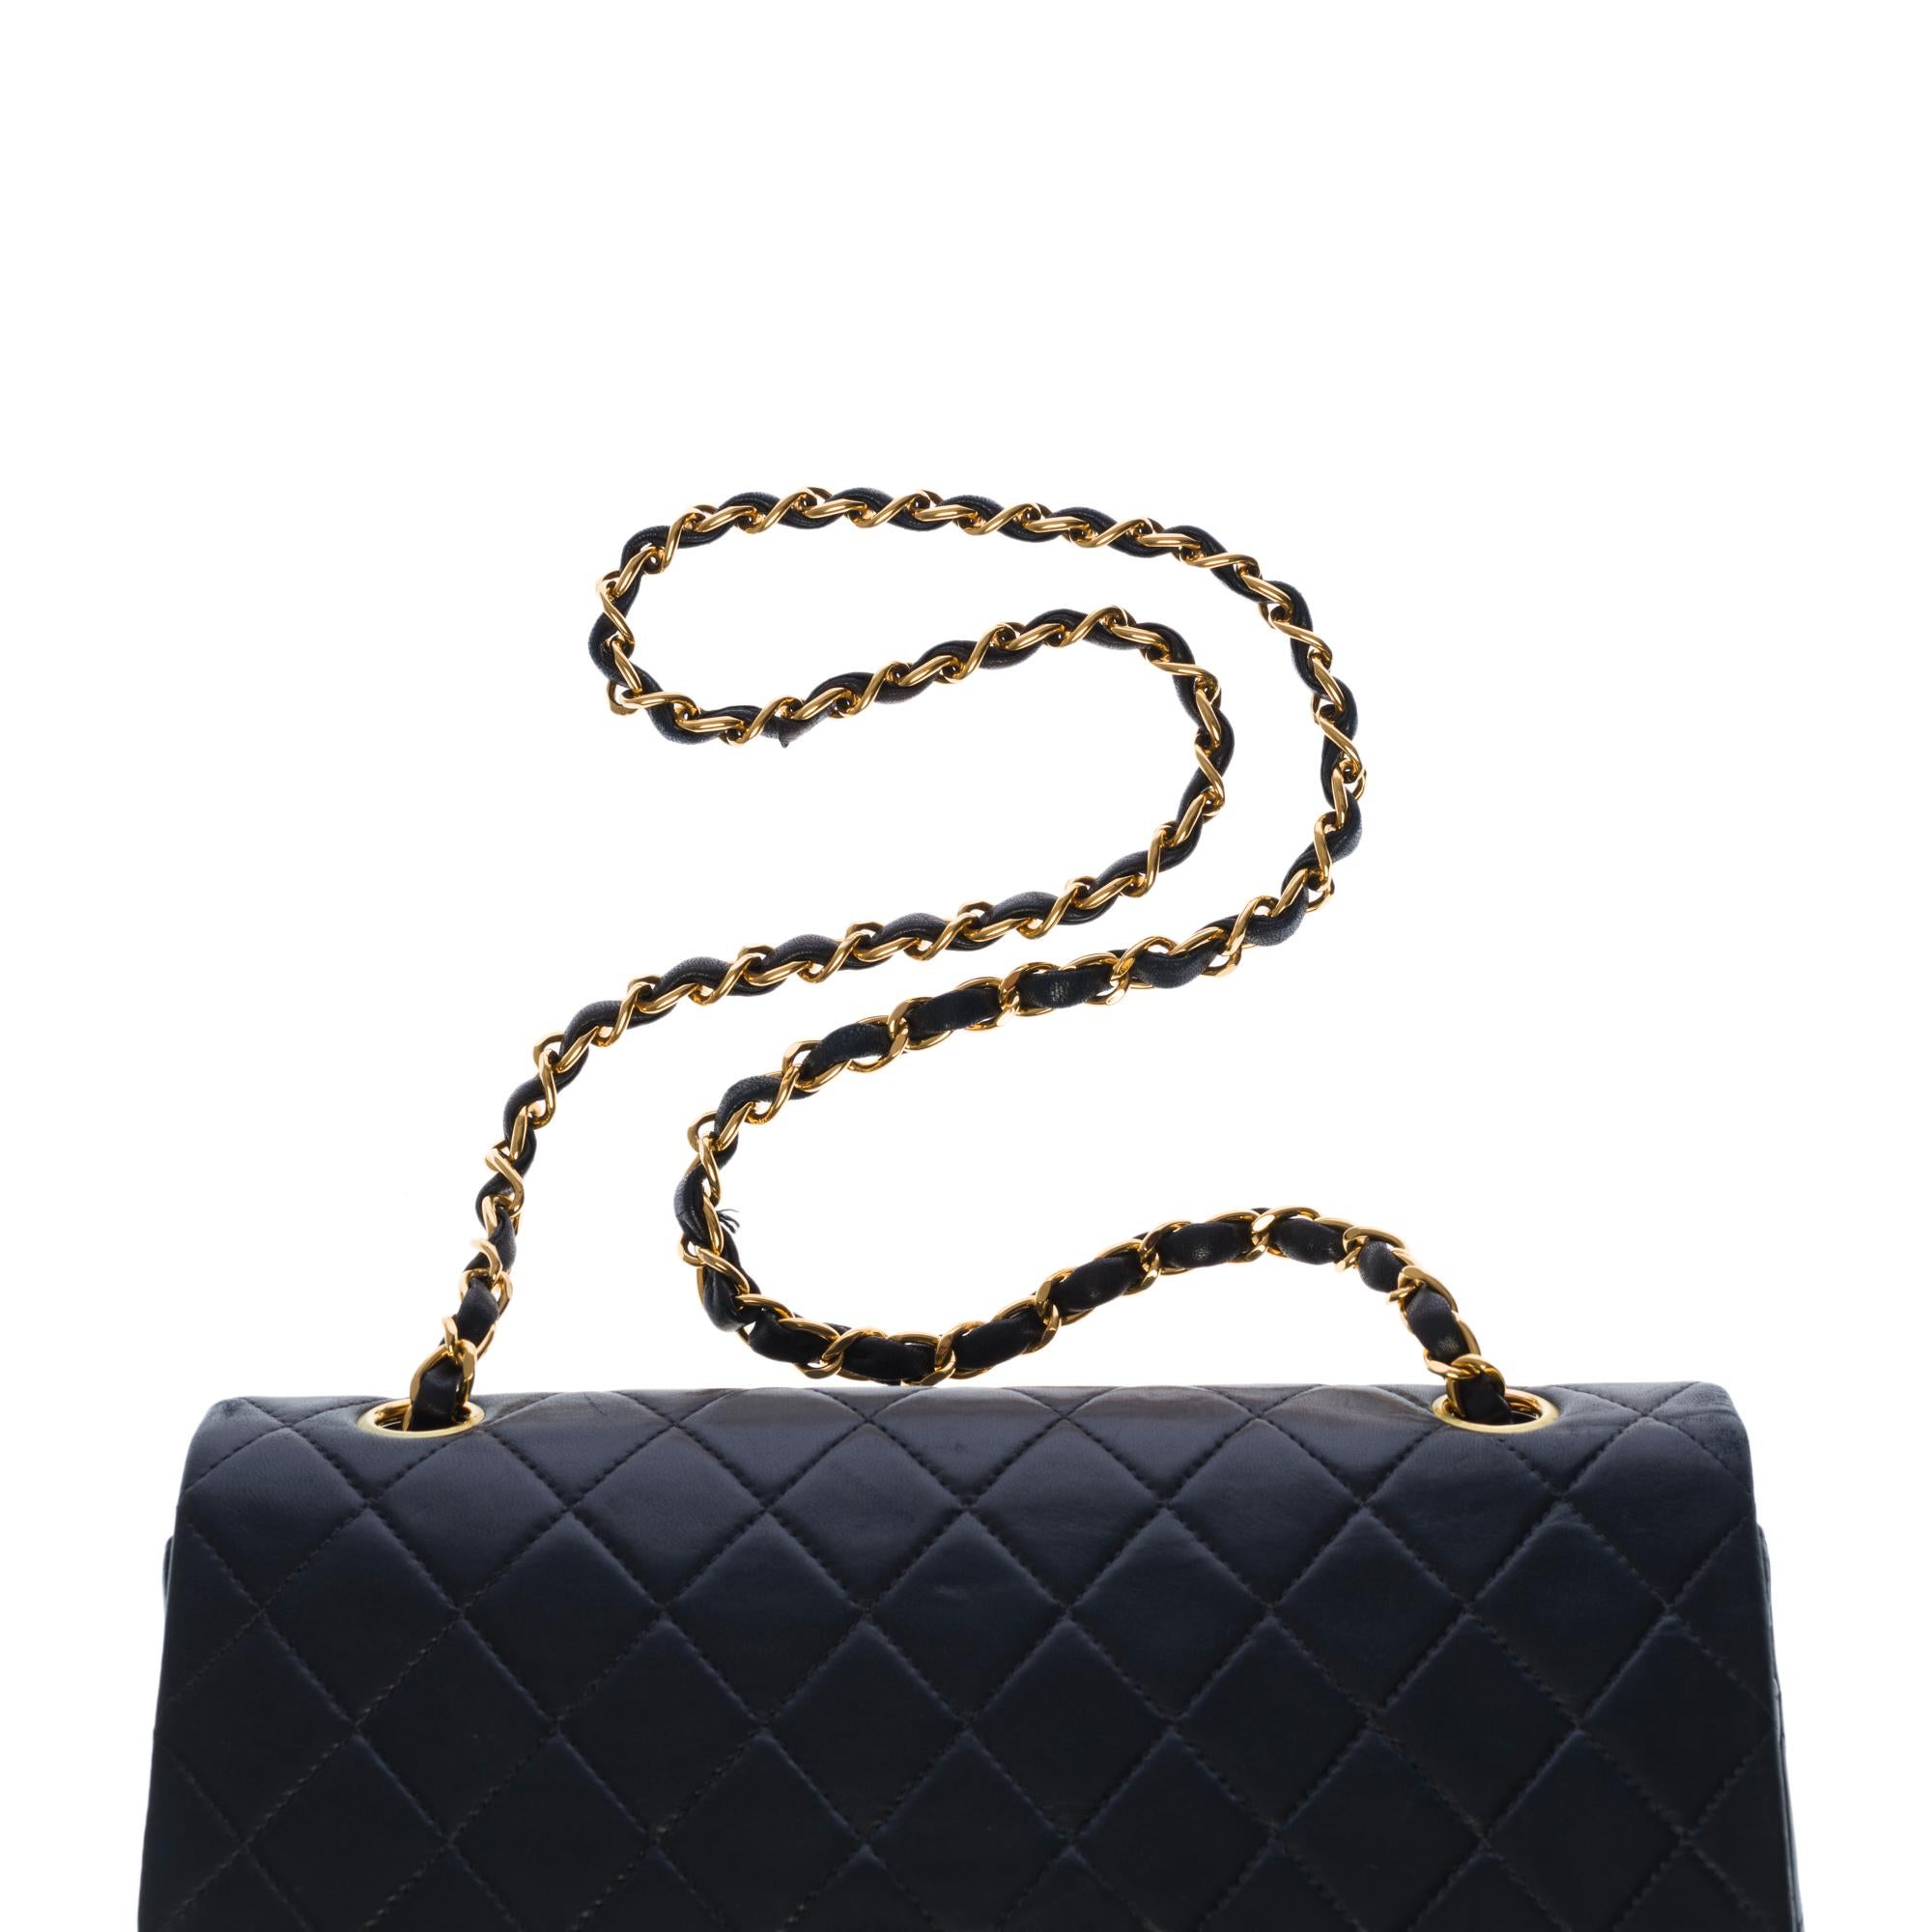 Chanel Timeless Medium double flap Shoulder bag in black quilted lambskin, GHW 3